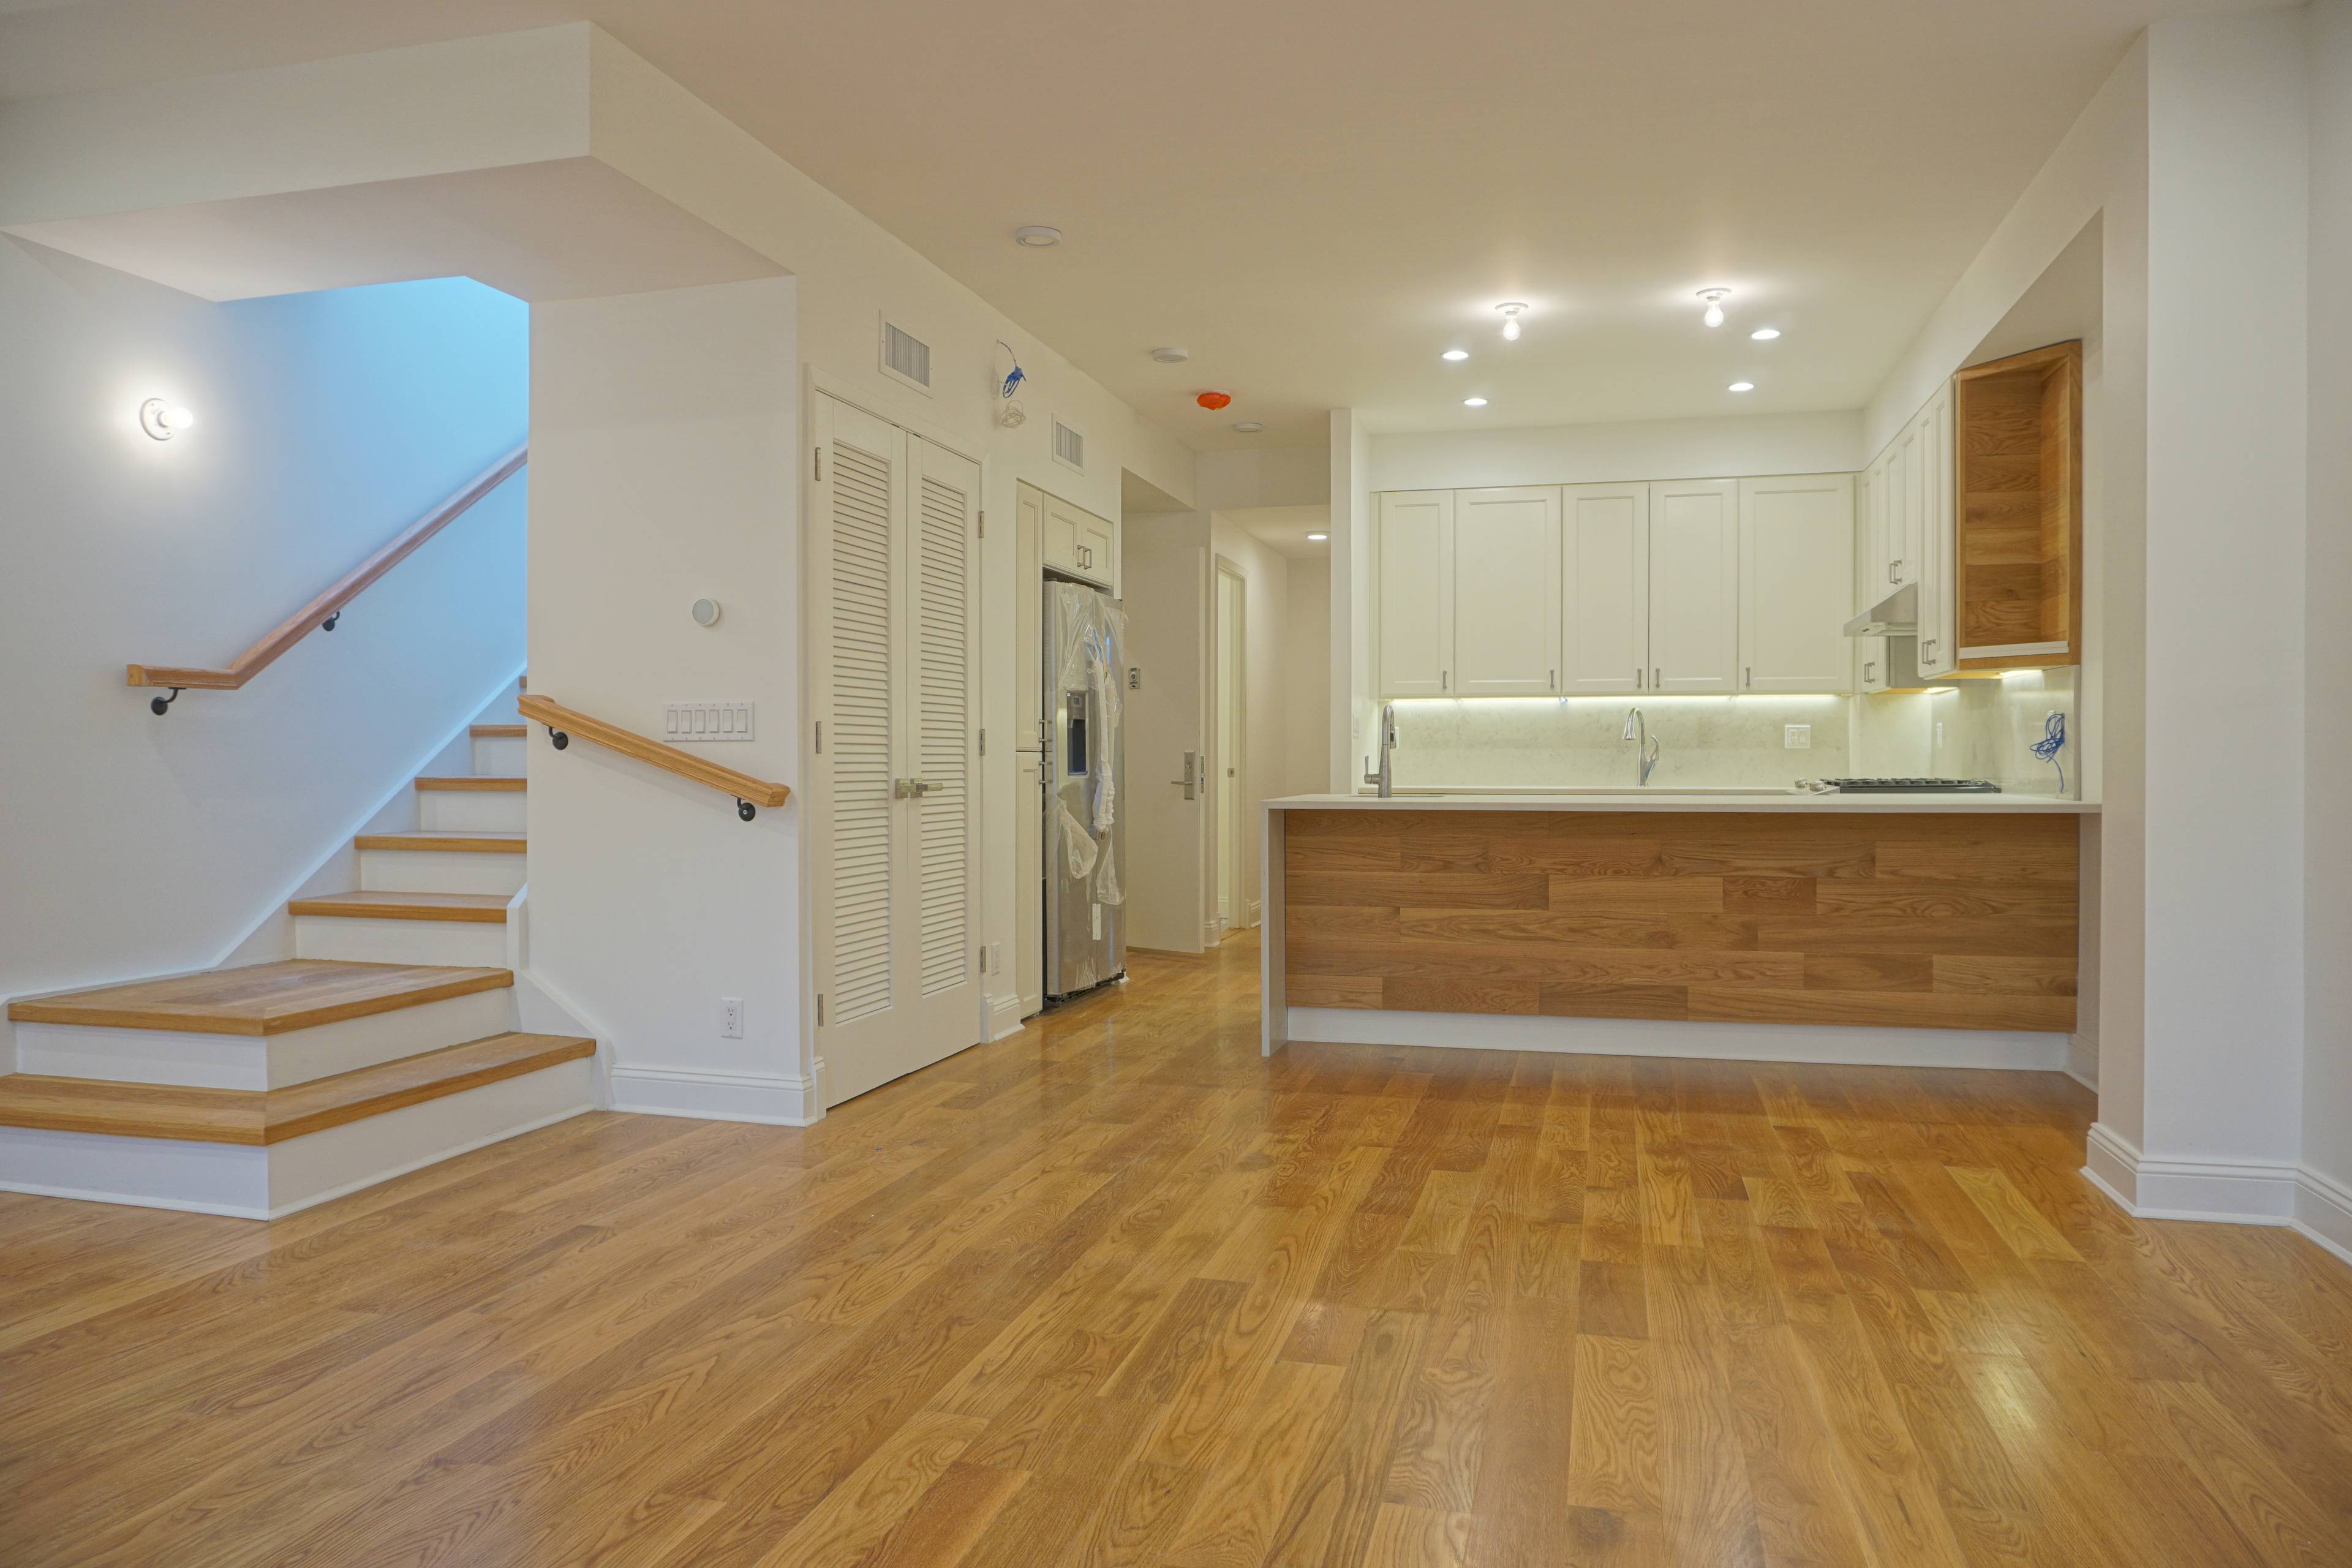 Be the first to live in this stunning newly constructed Bay Ridge duplex.